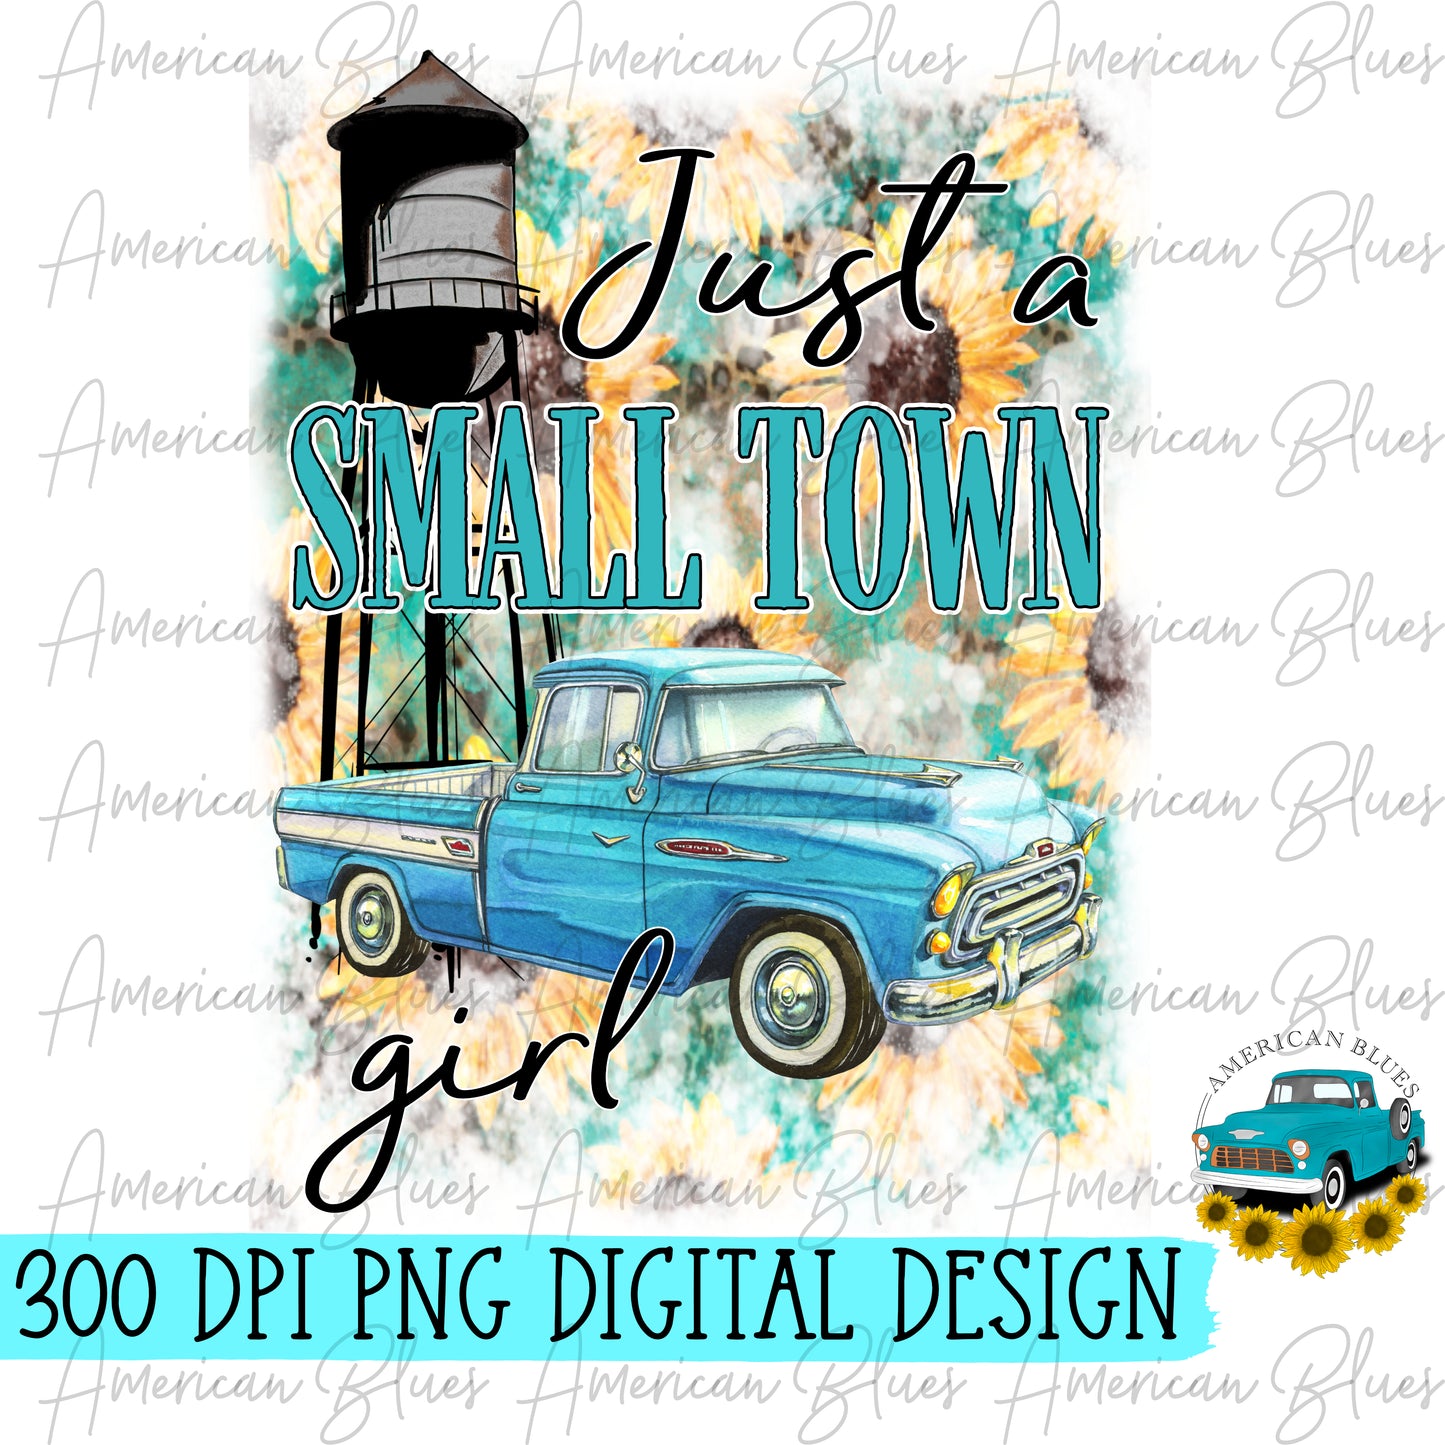 Just a small town girl blue truck- water tower